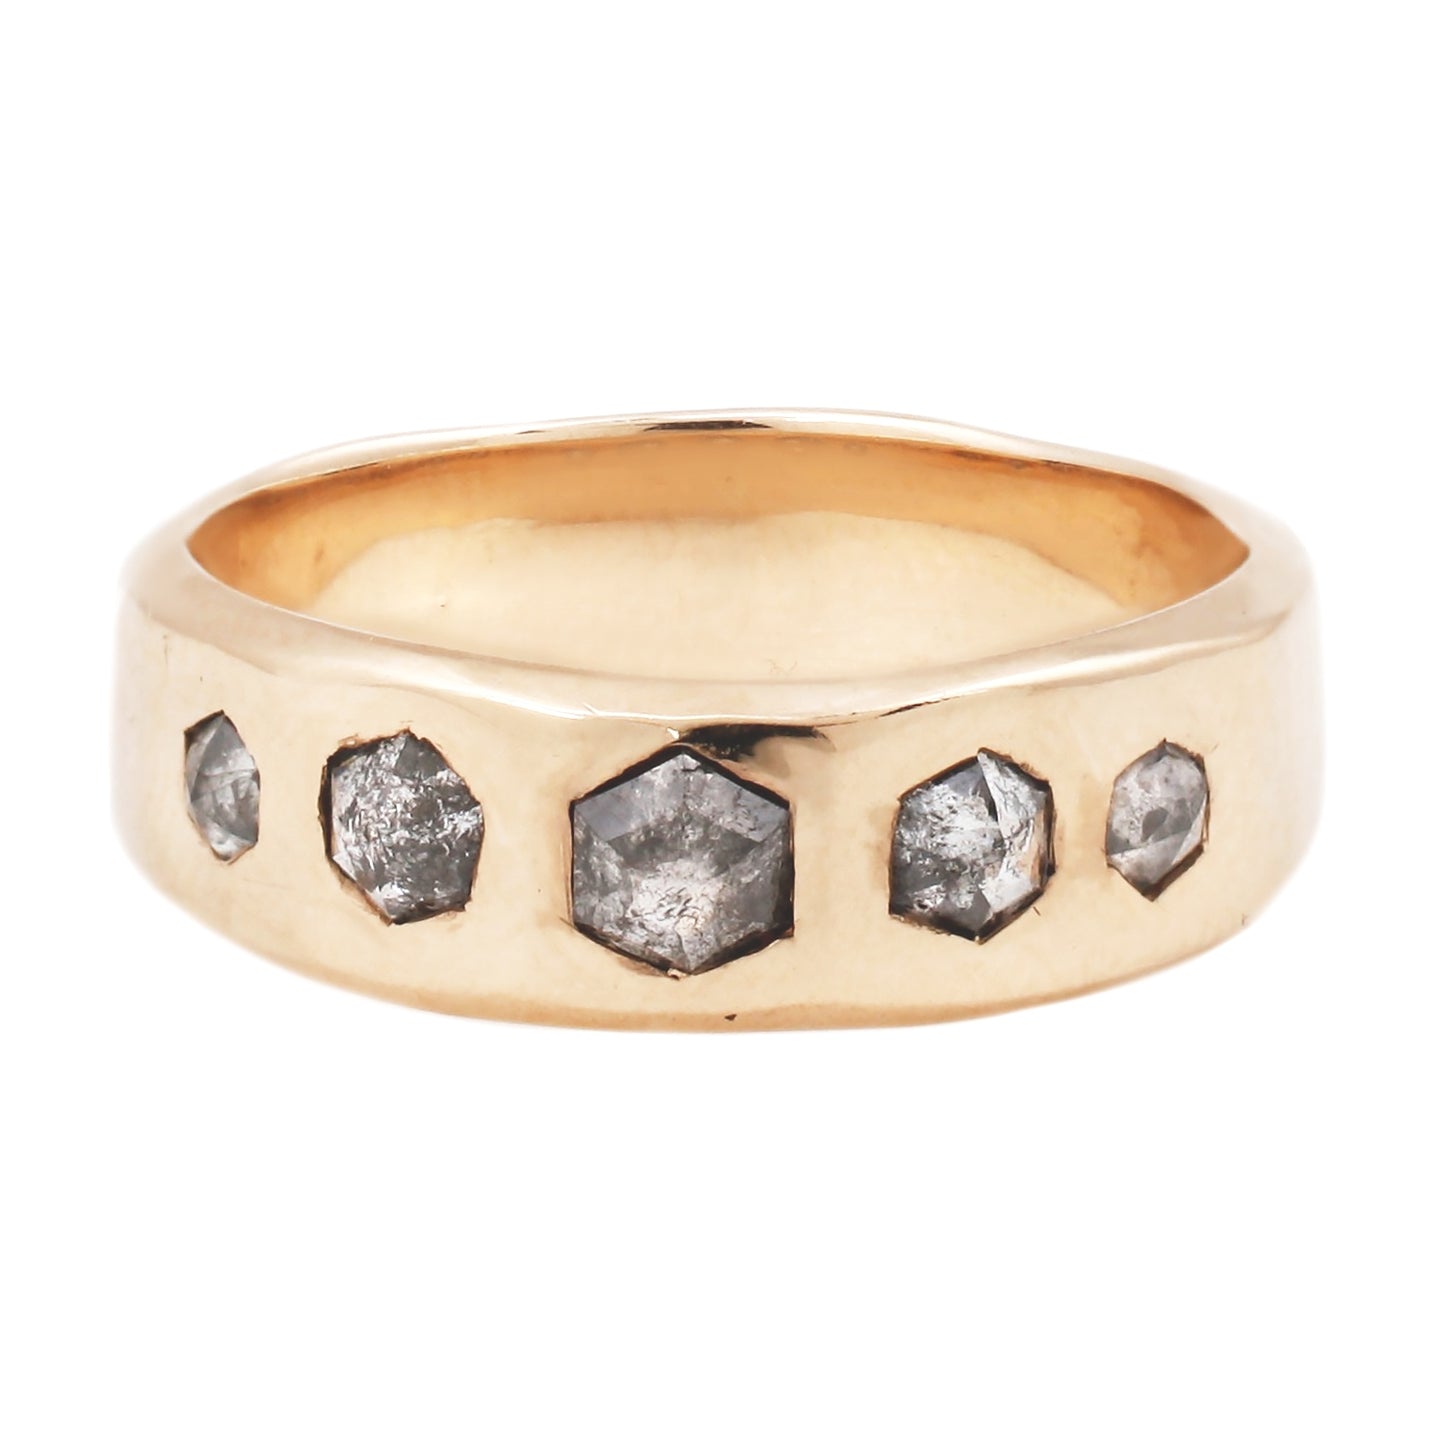 Adeline Gold Quintet Ring with Diamonds